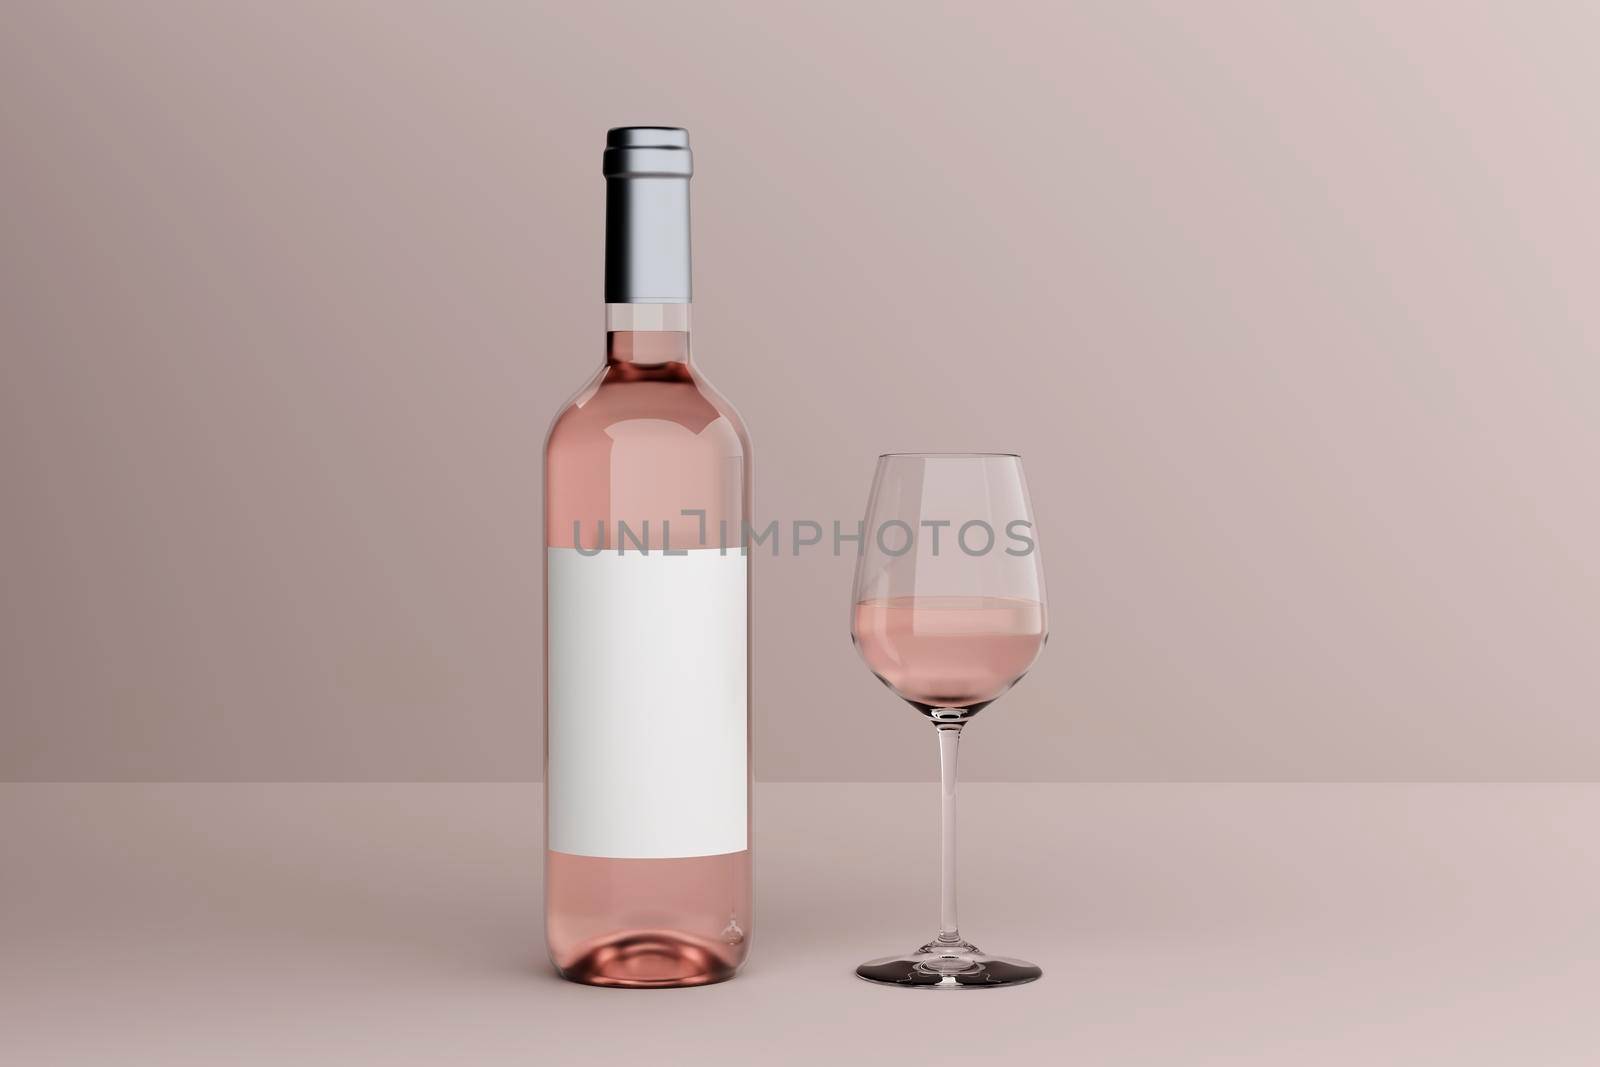 Bottle of rose wine with label and a glass goblet in photo-realistic style on a clear orange background. 3d realism illustration by raferto1973